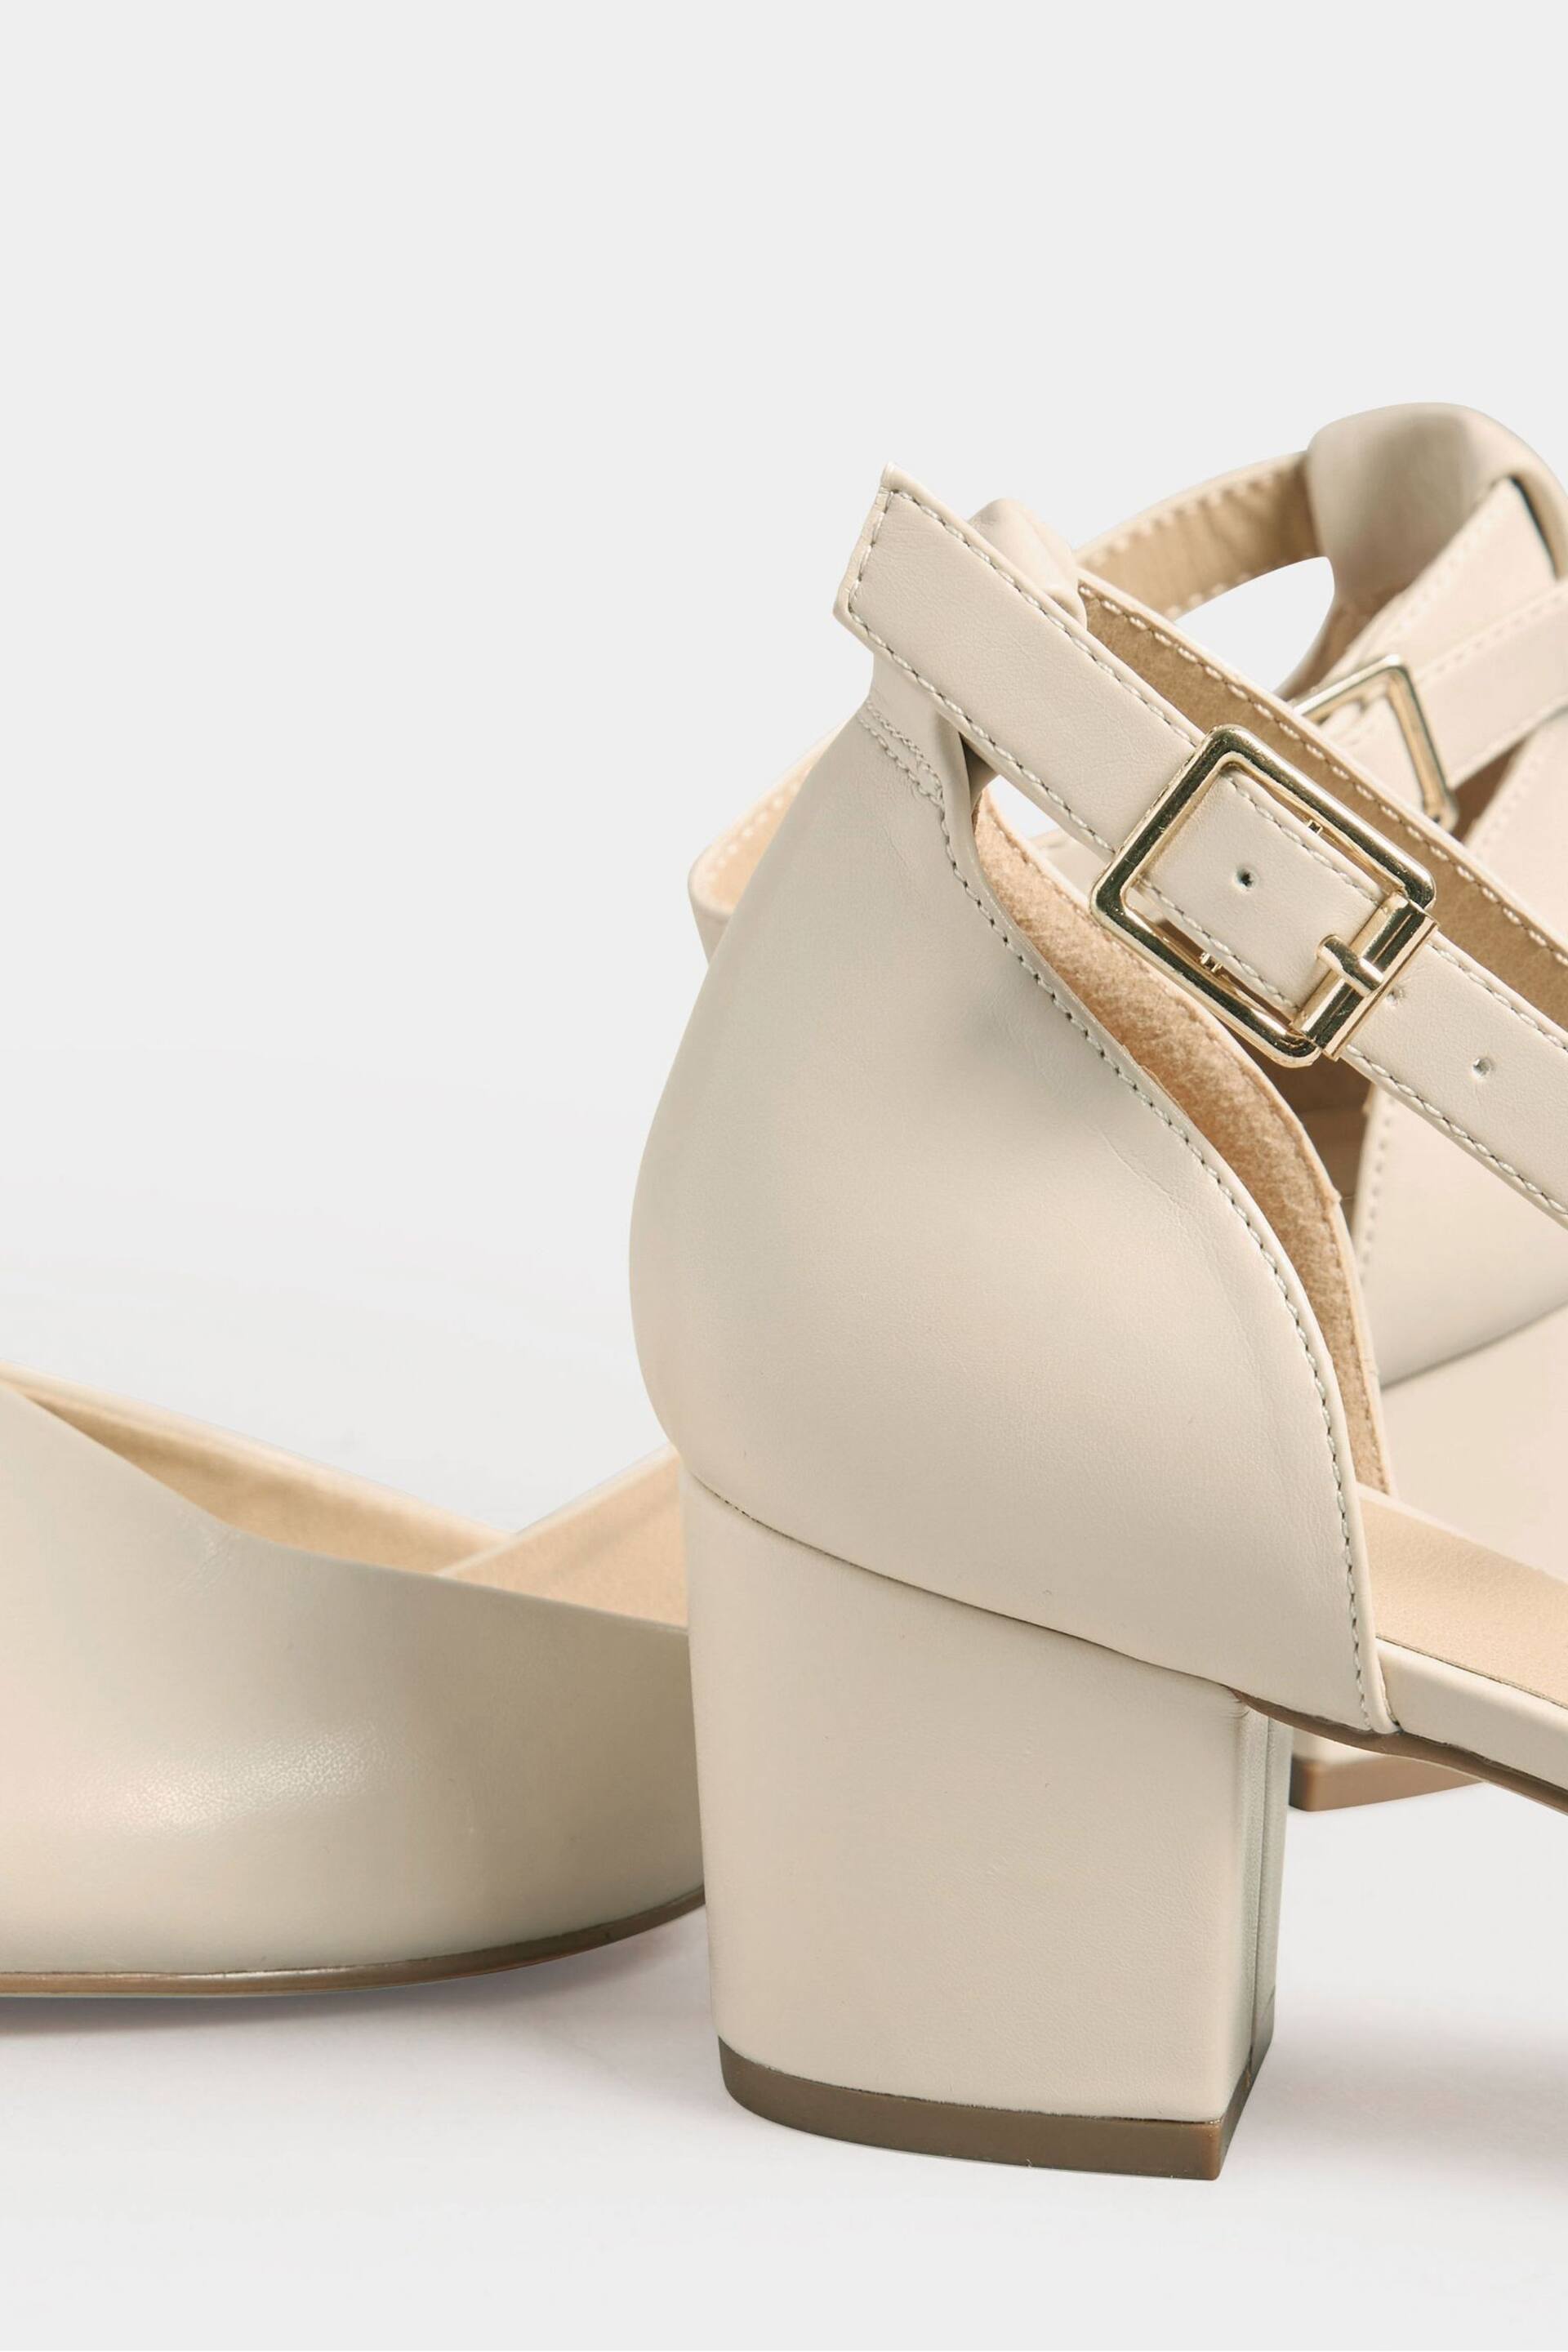 Long Tall Sally Nude Two Part Block Heel Court Shoes - Image 5 of 5